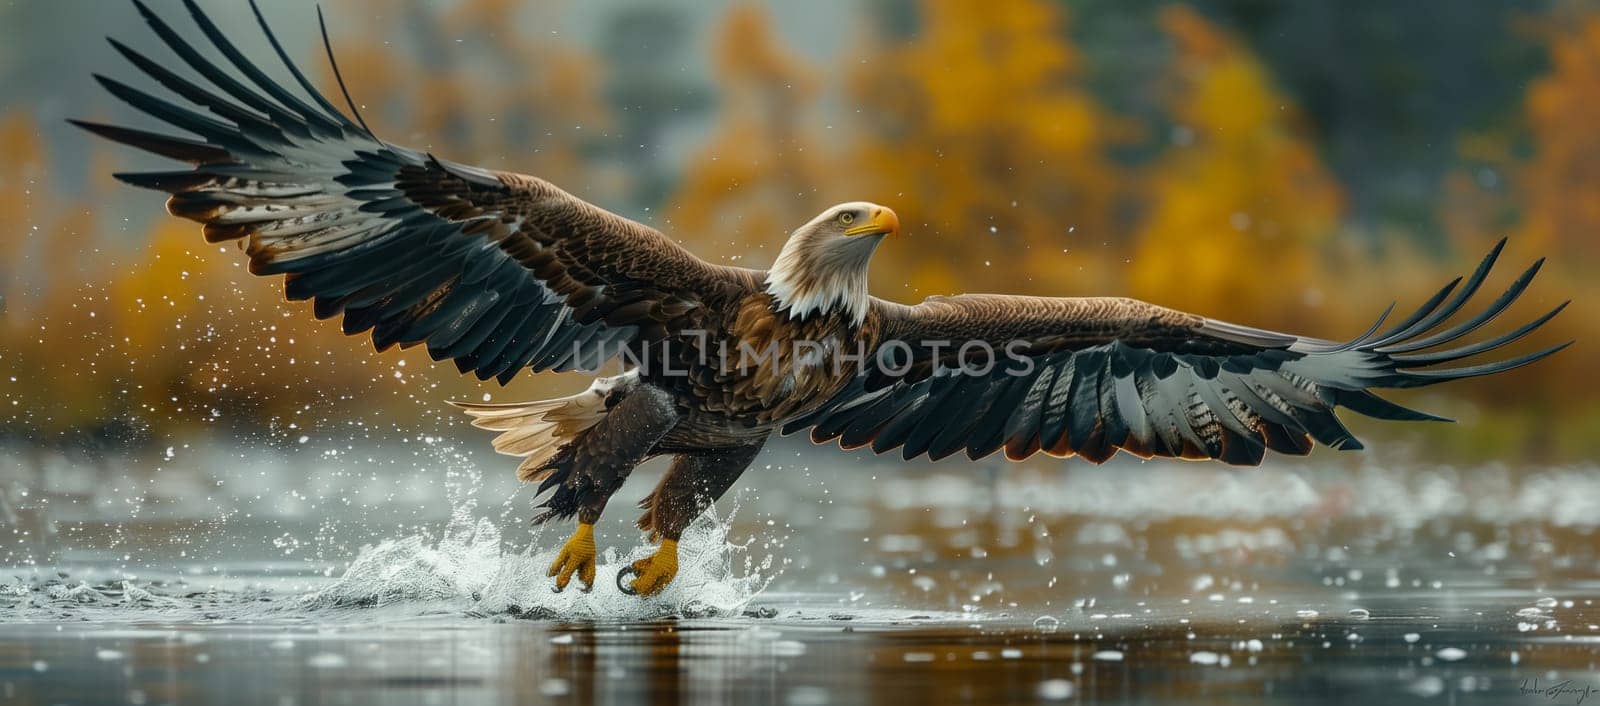 An Accipitridae bird, specifically a bald eagle of the Accipitriformes order, is soaring over a body of water with its wings spread wide